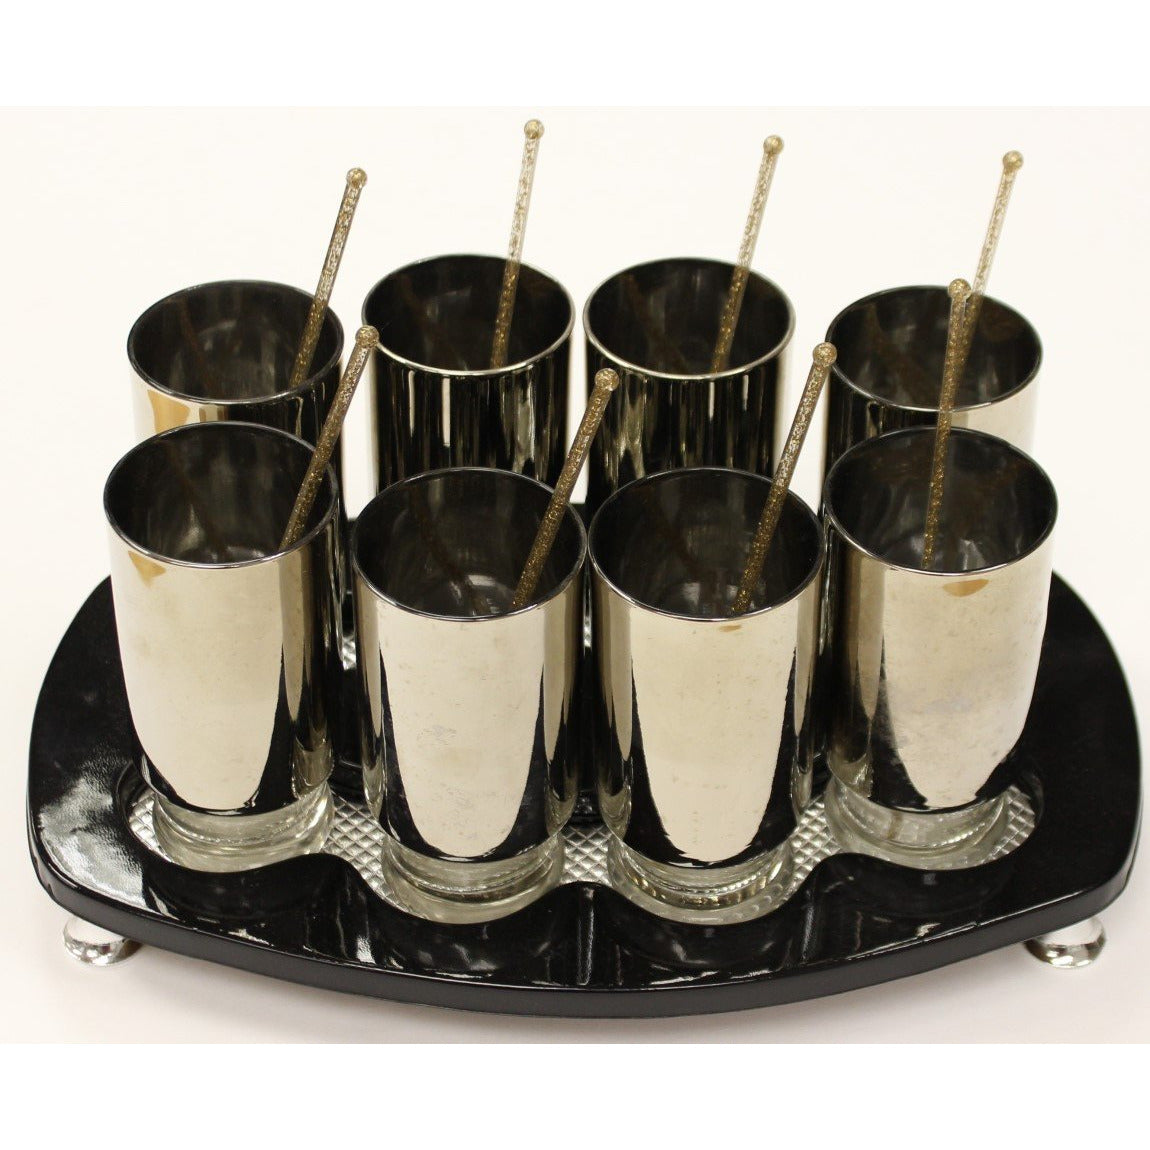 Set of 8 Cocktail Silver Glasses on Black Serving Tray